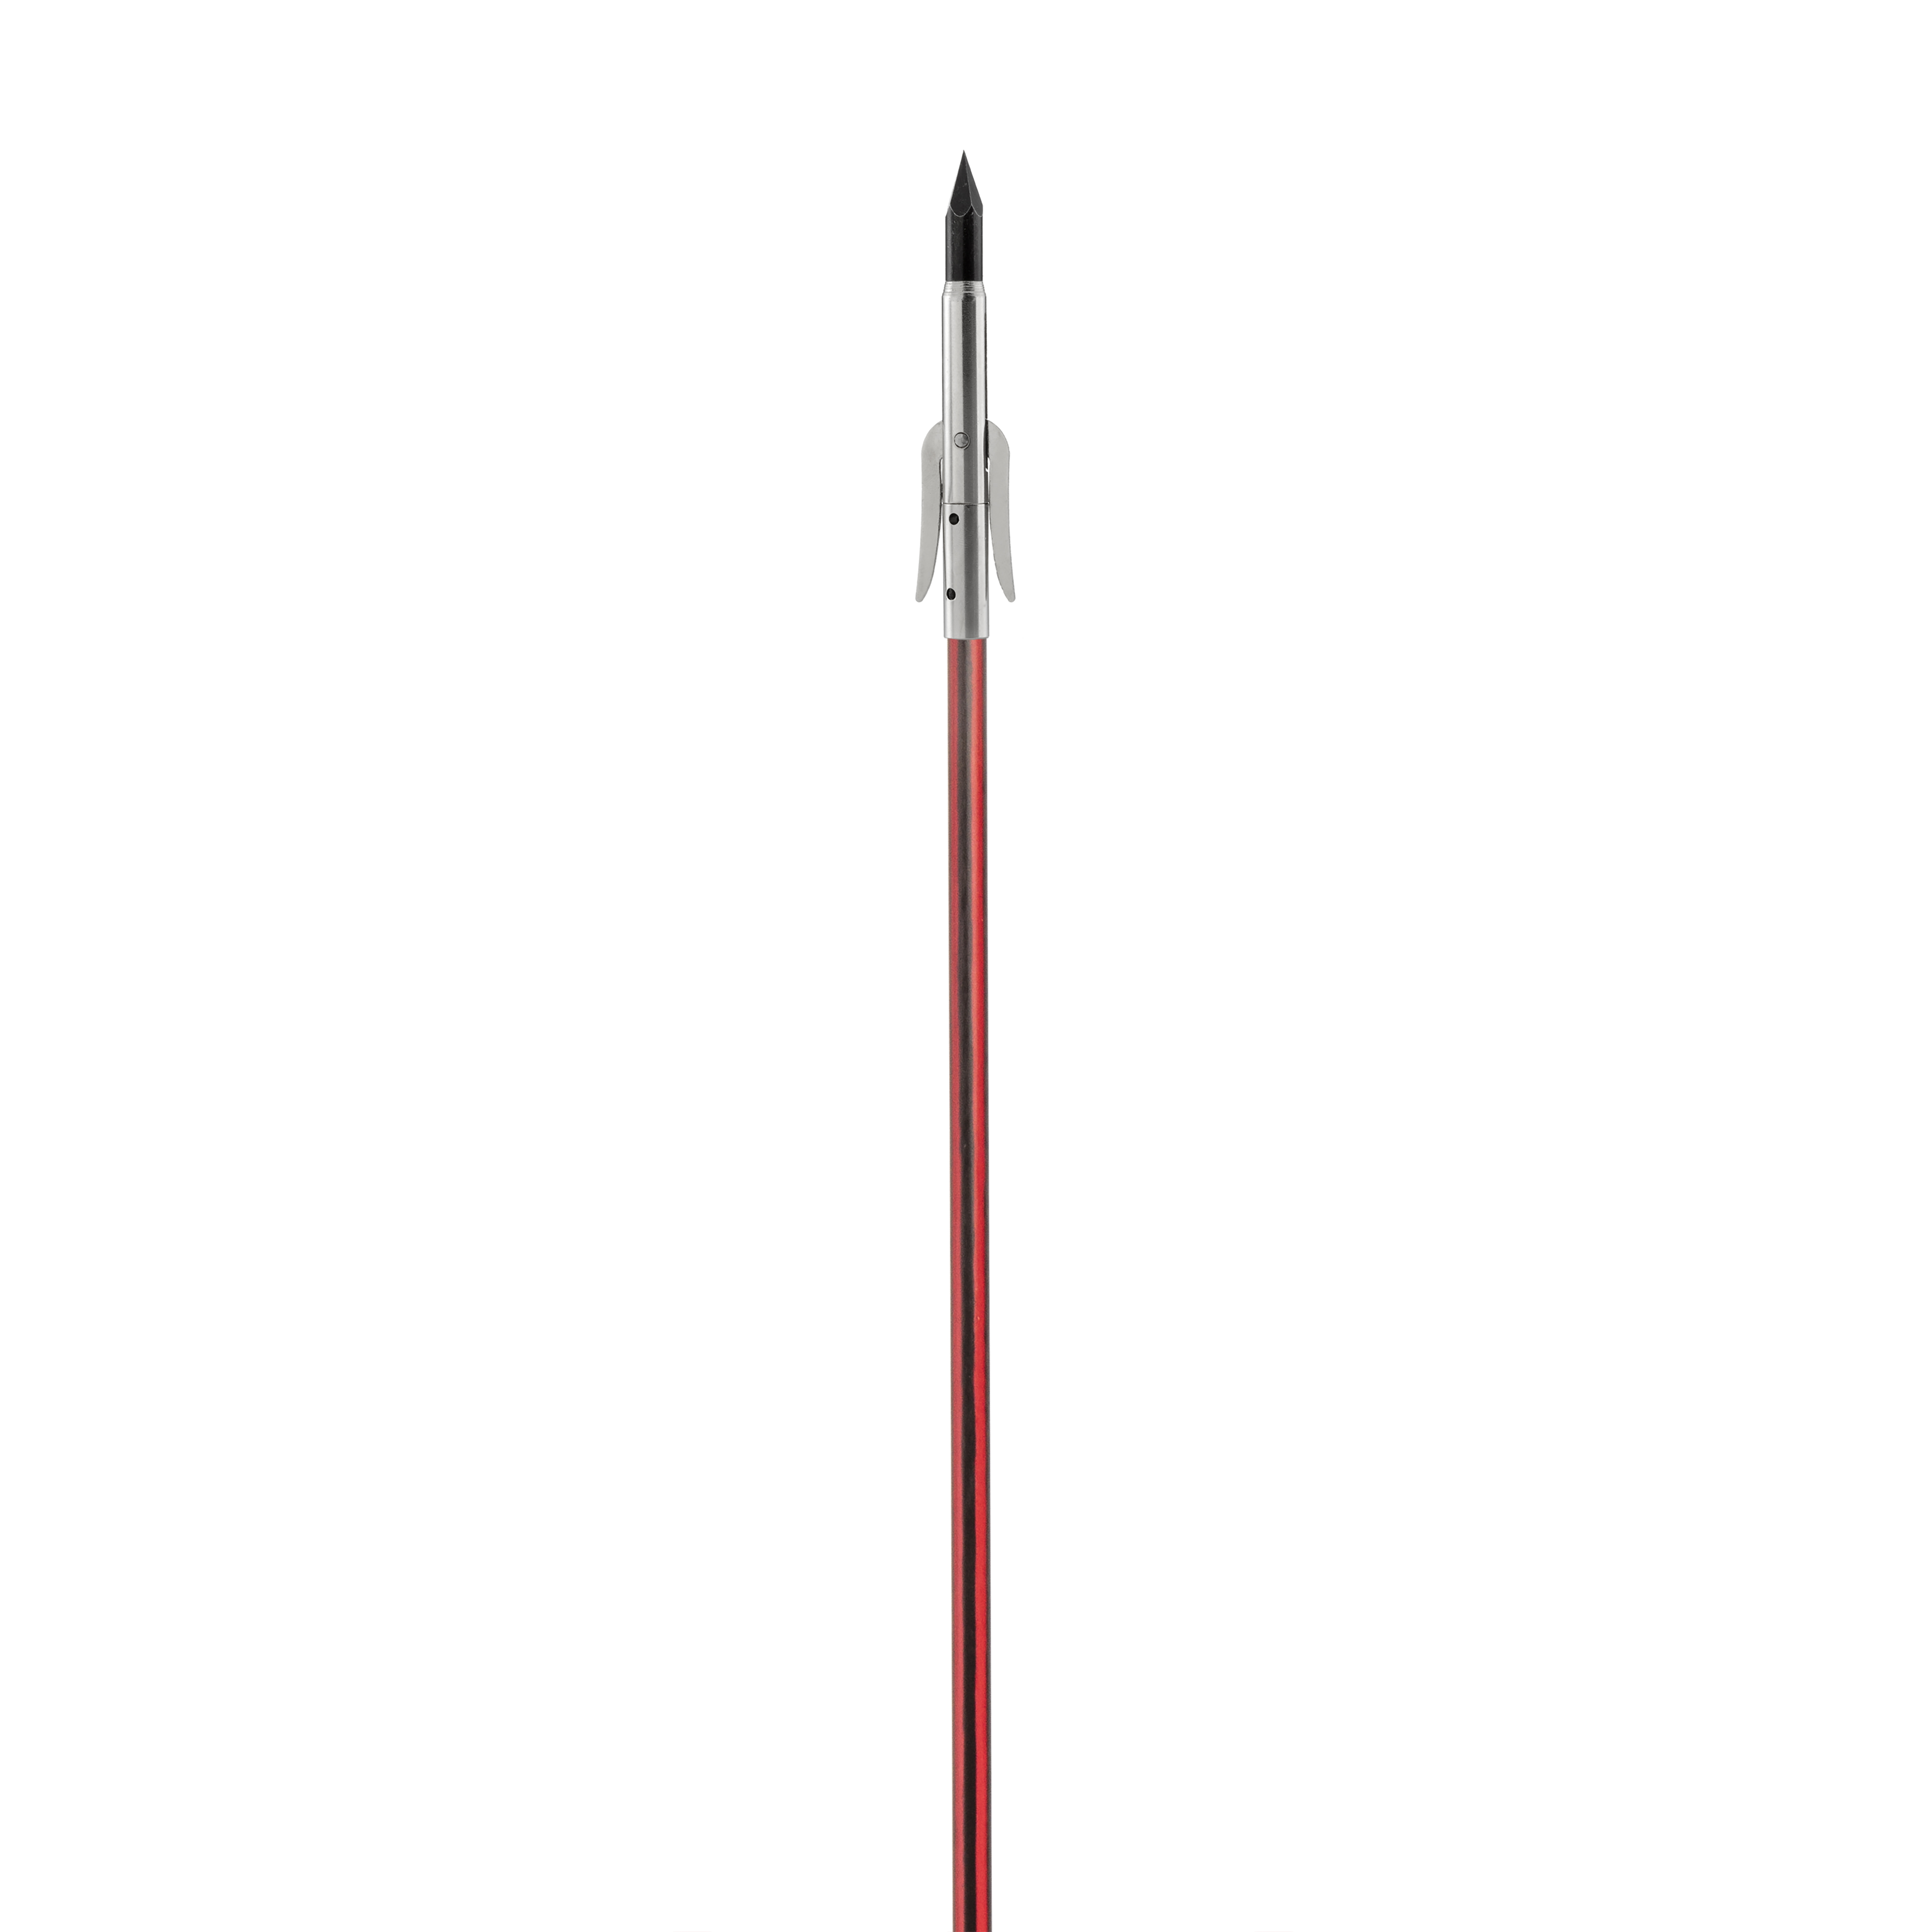 Cajun Bowfishing Carbon Infuse Arrow With Sting A Ree Point